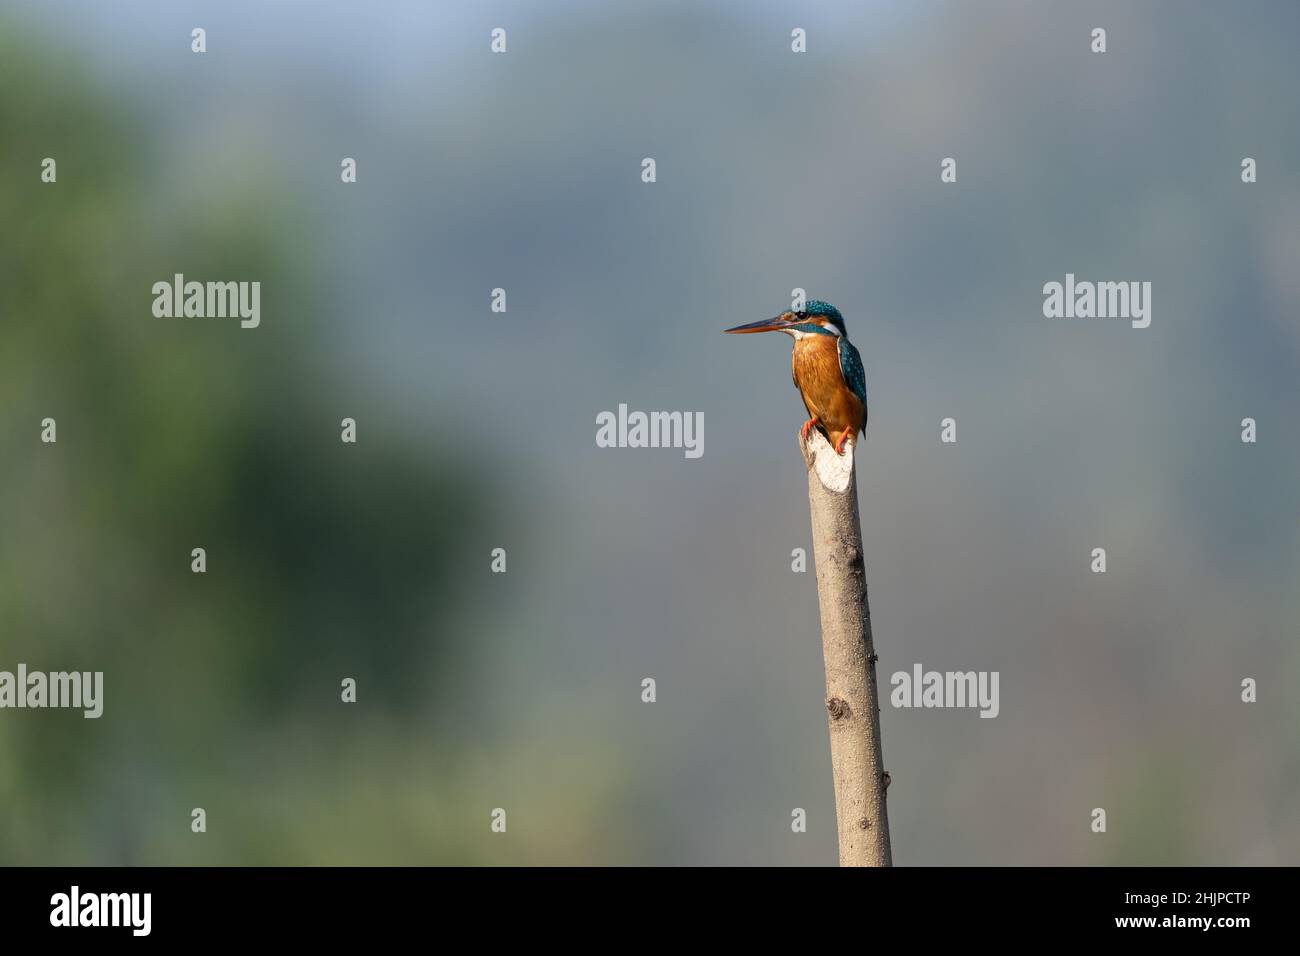 common kingfisher perched on a wooden log Stock Photo